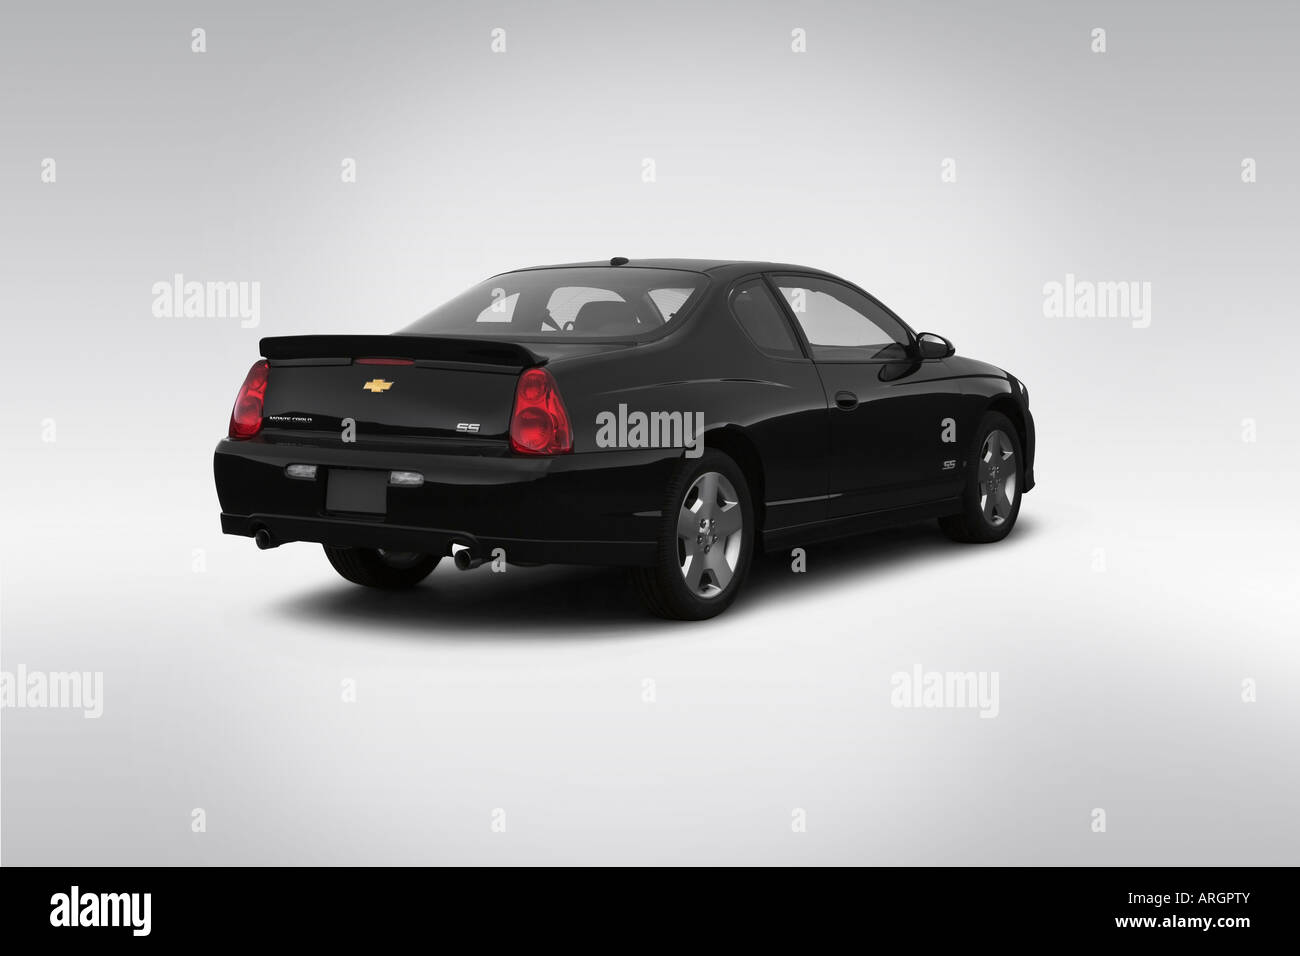 2007 Chevrolet Monte Carlo SS in Black - Rear angle view Stock Photo - Alamy